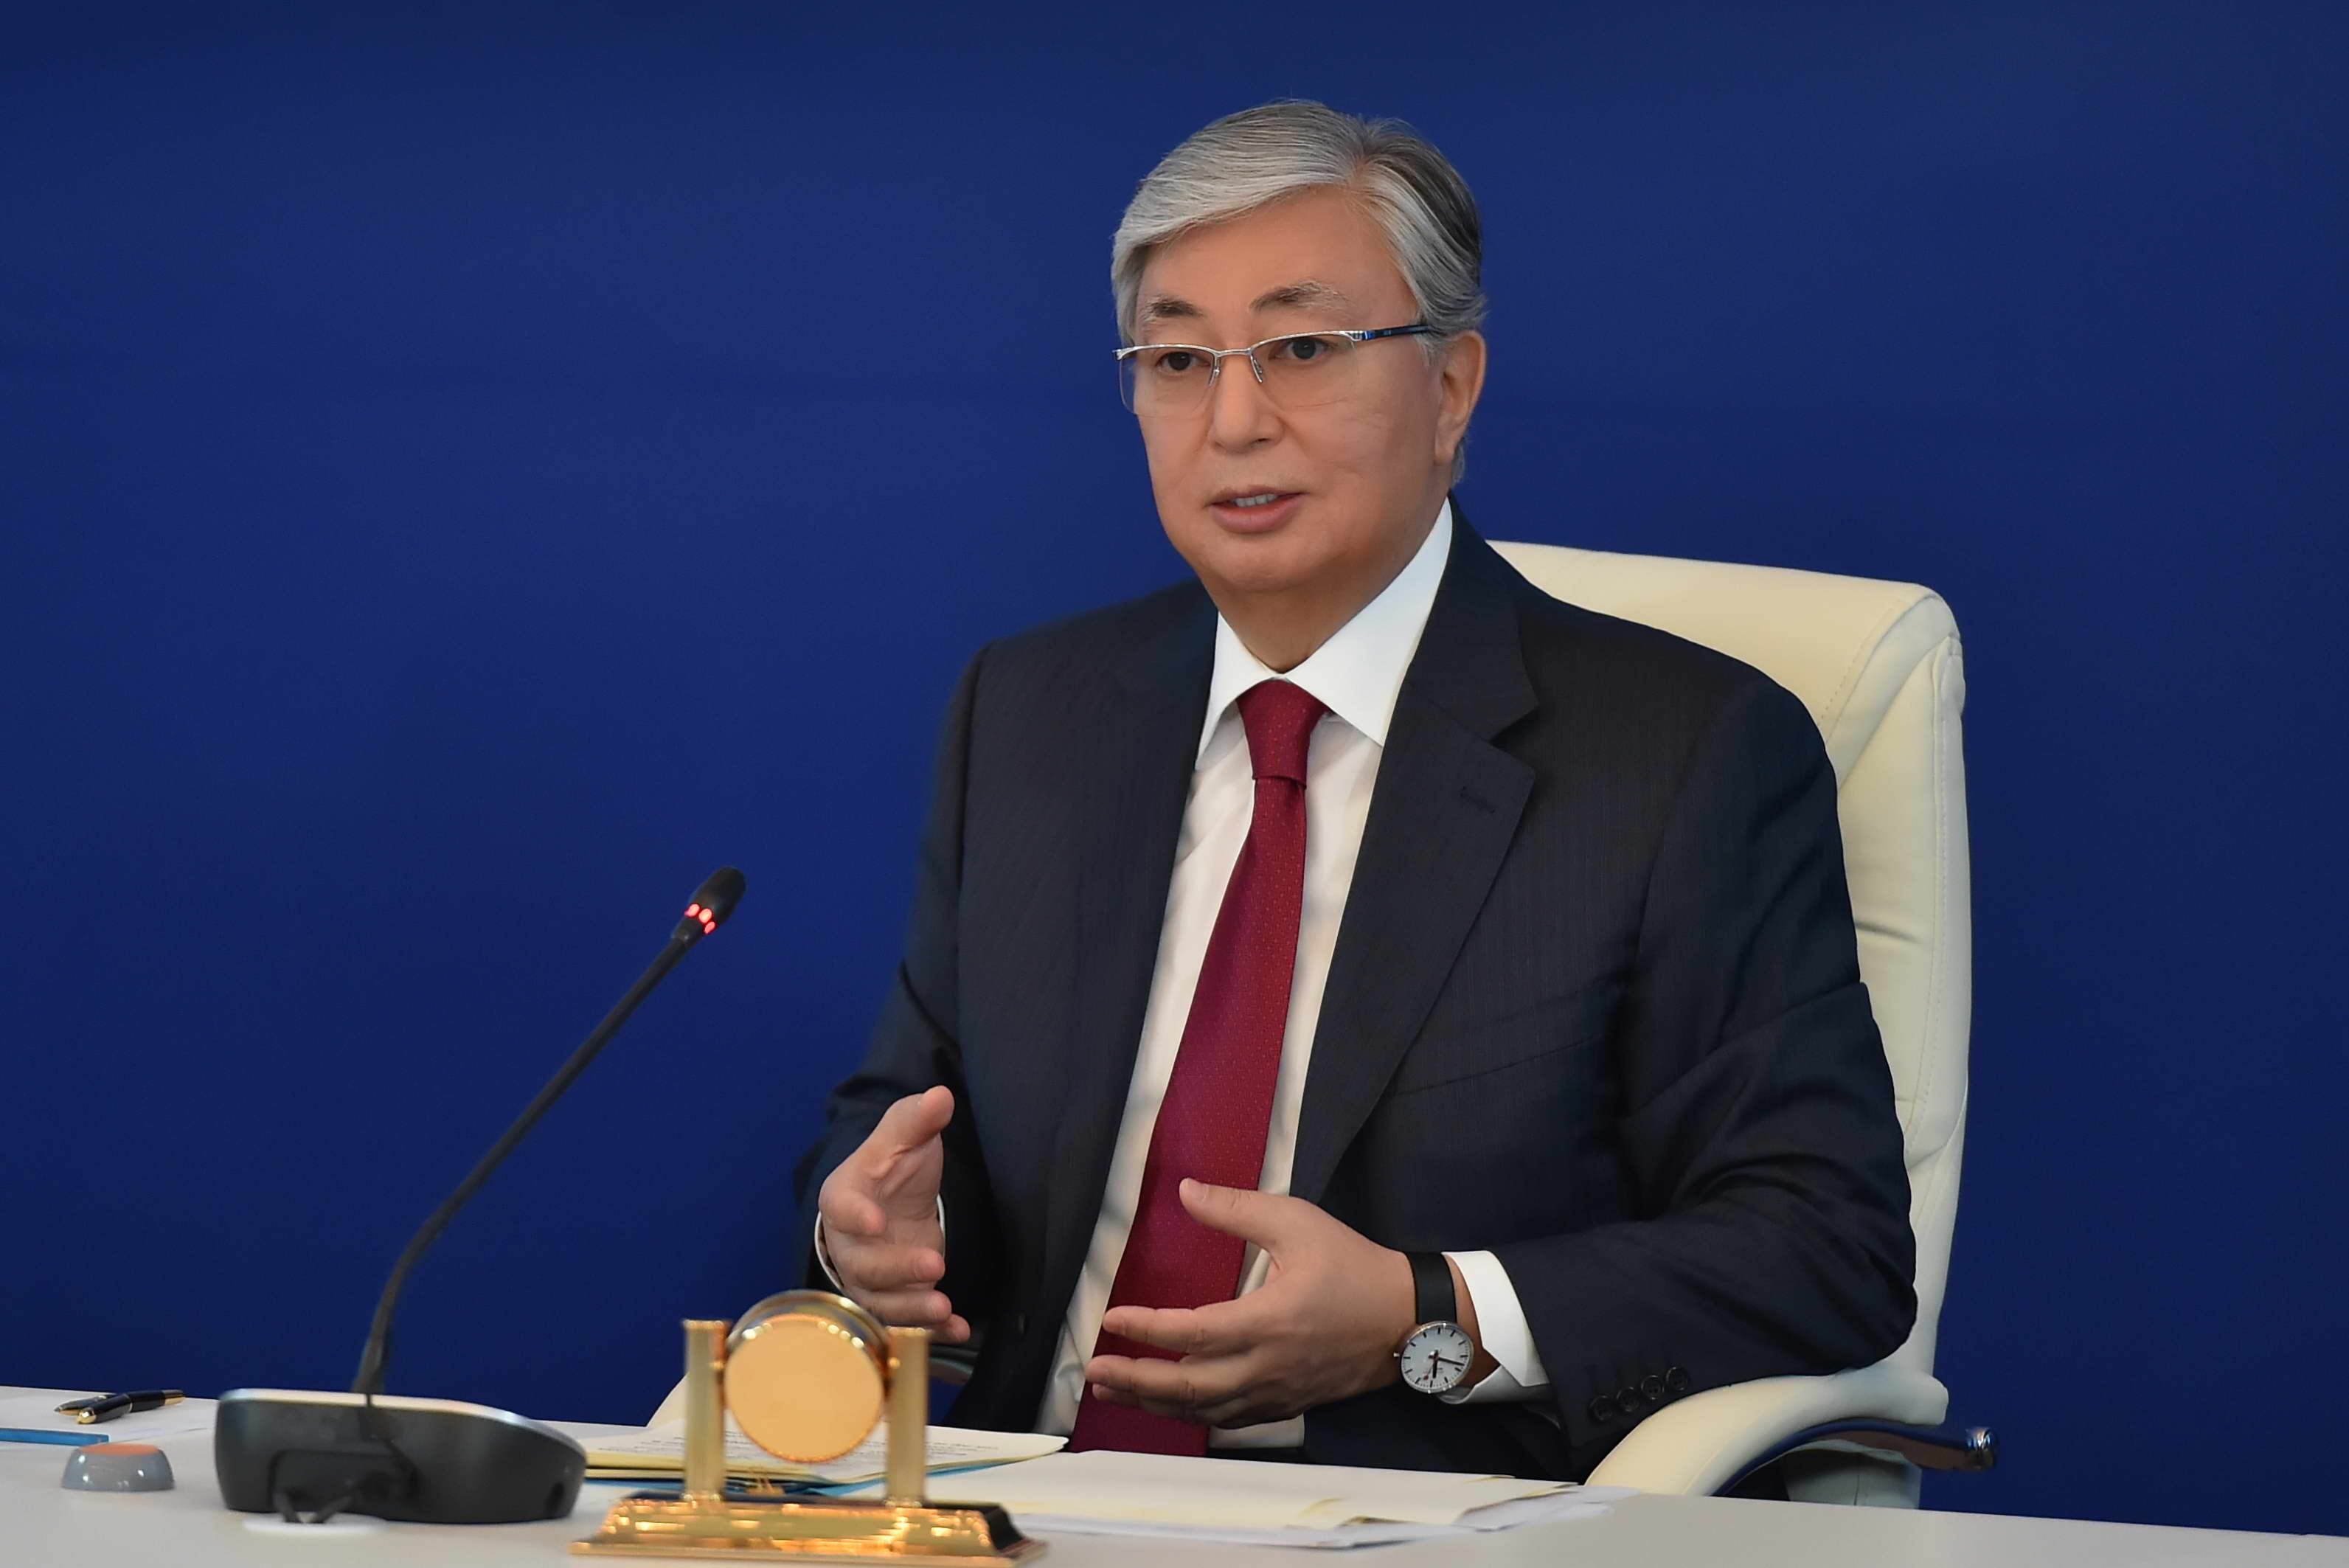 Comprehensive digitalization should become a driving force for the development of the EEU economies, Tokayev stated  